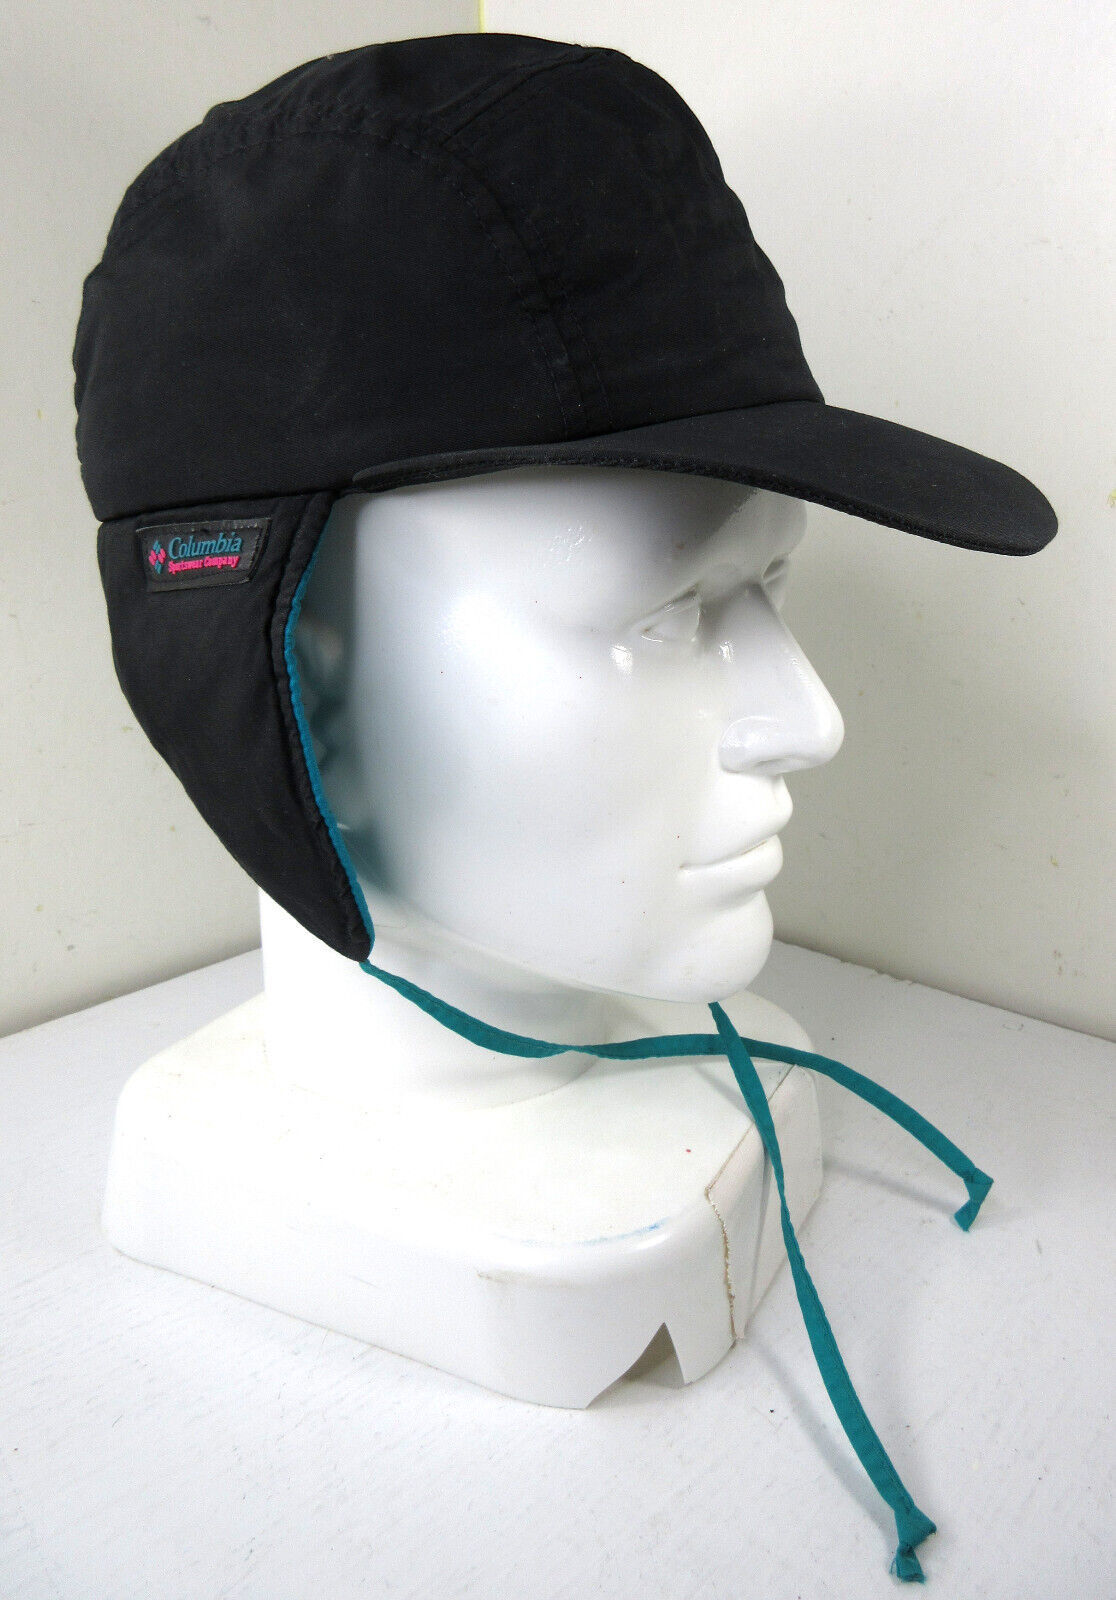 Primary image for Vintage Columbia Sportswear Trapper Hat Ear Flaps Black Purple Green Retro Color